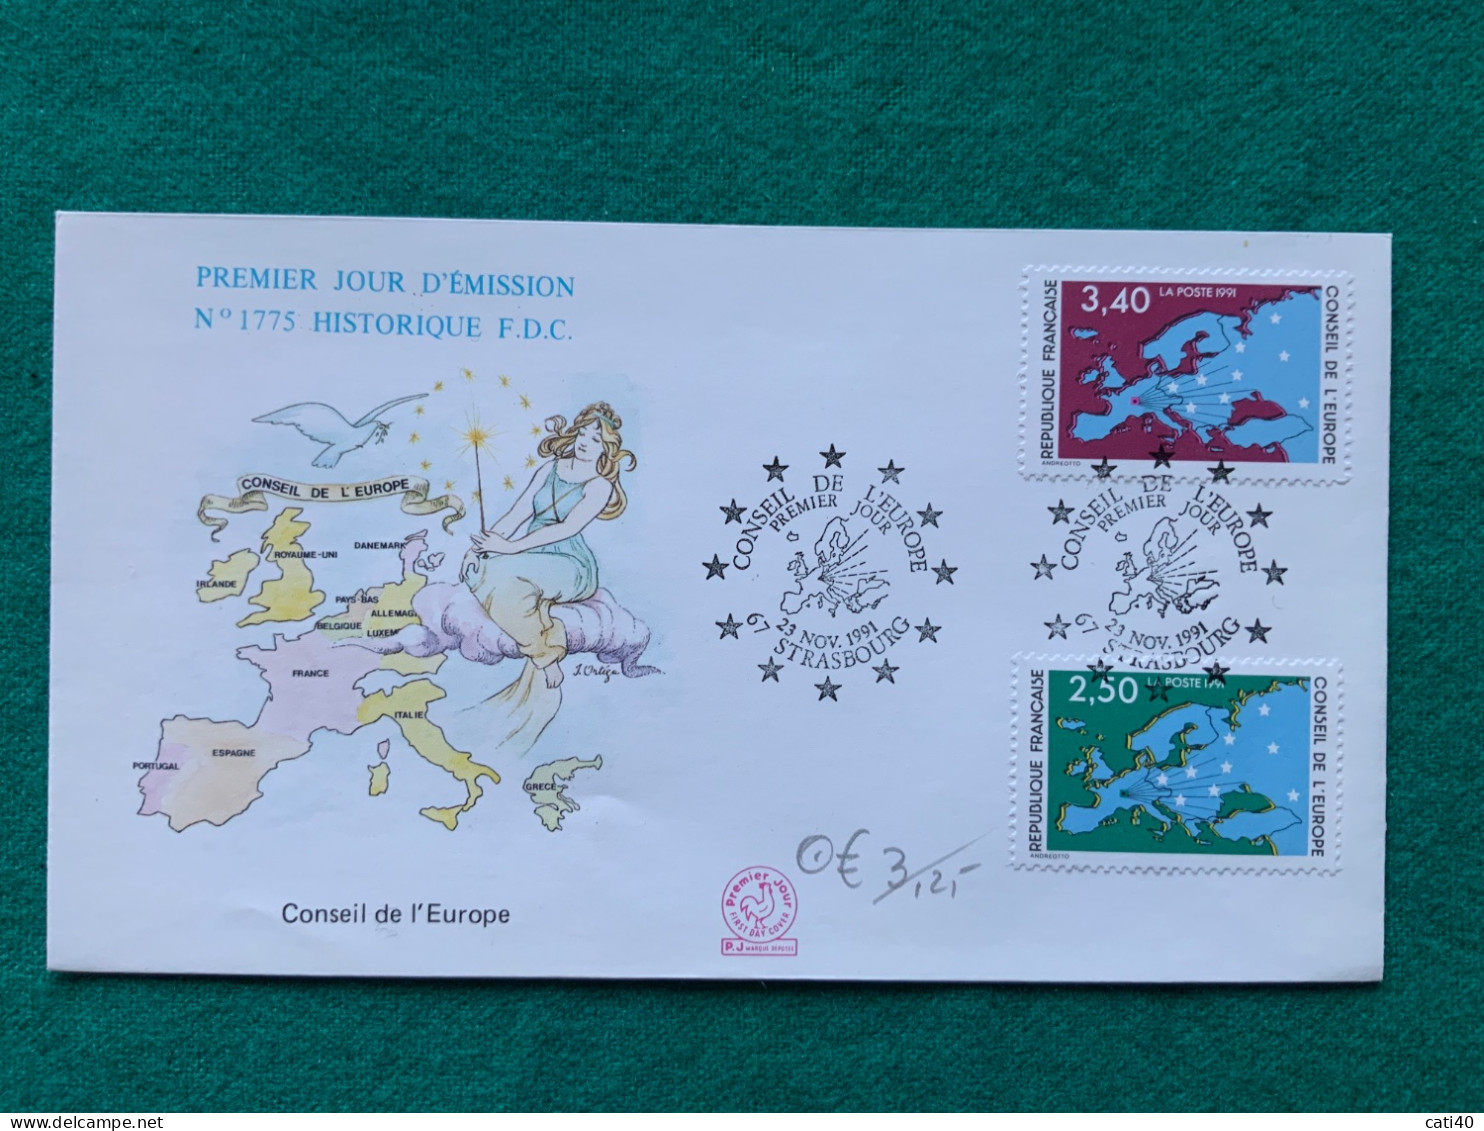 FRANCIA -  CONSIGLIO D'EUROPA  -   FDC 1991 - Covers & Documents